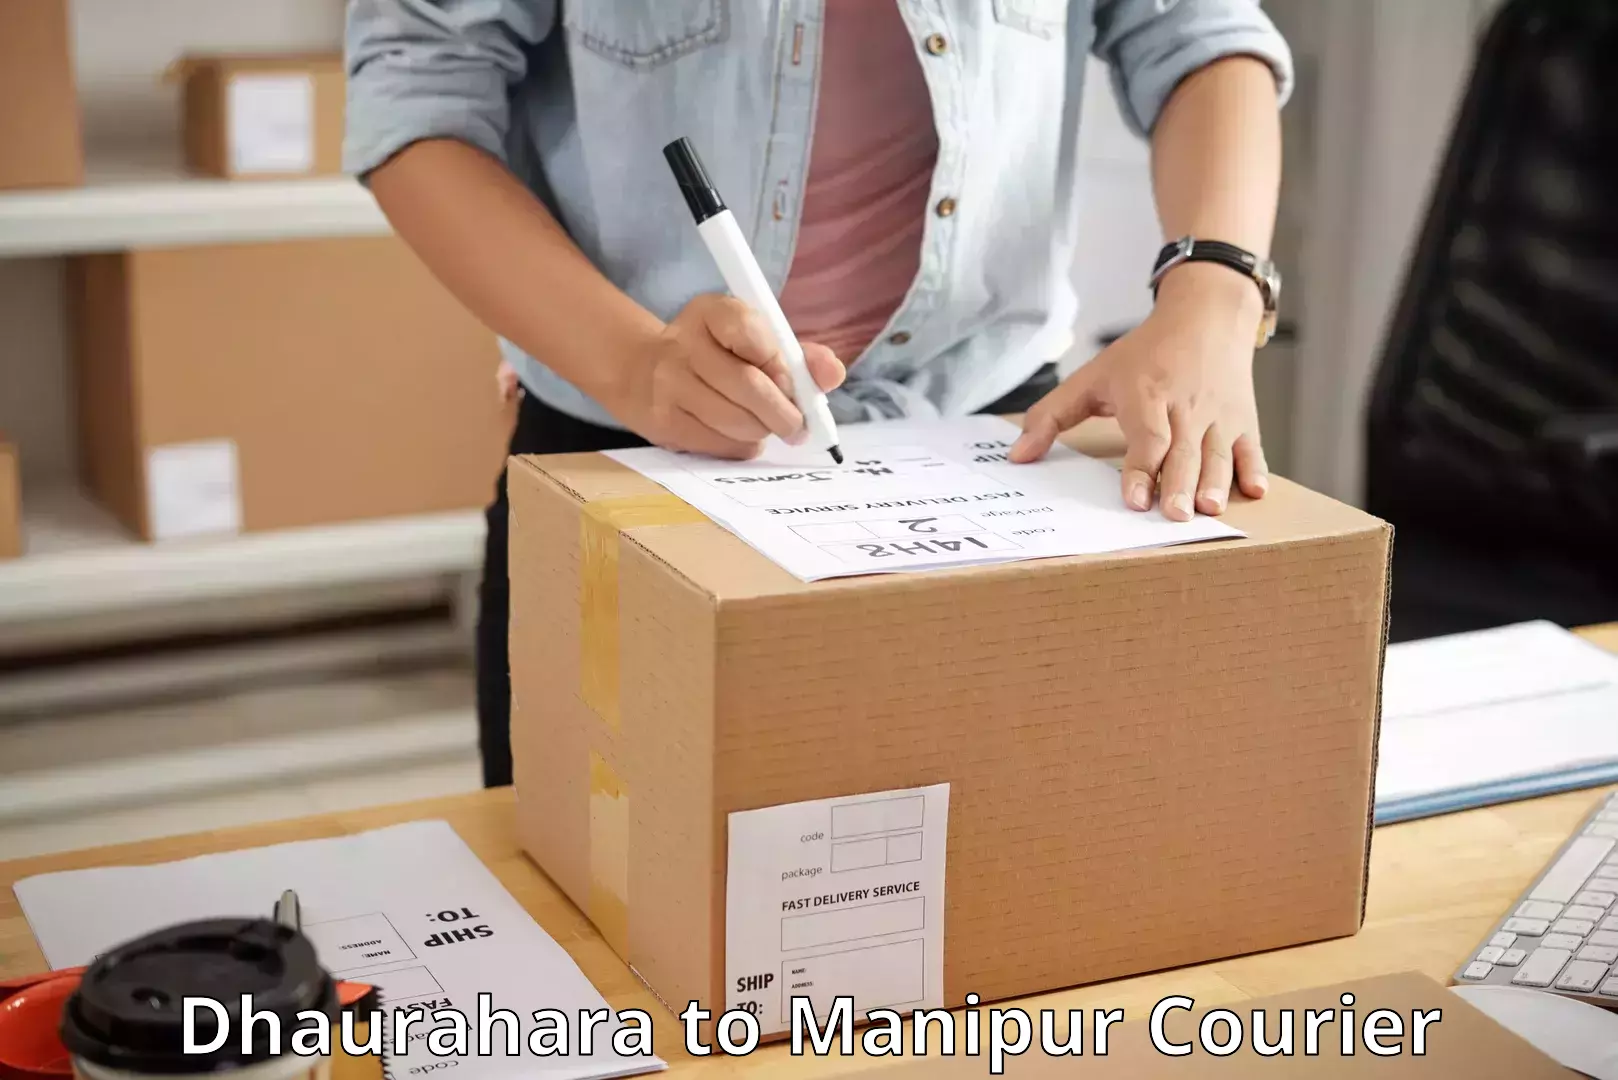 State-of-the-art courier technology Dhaurahara to Moirang